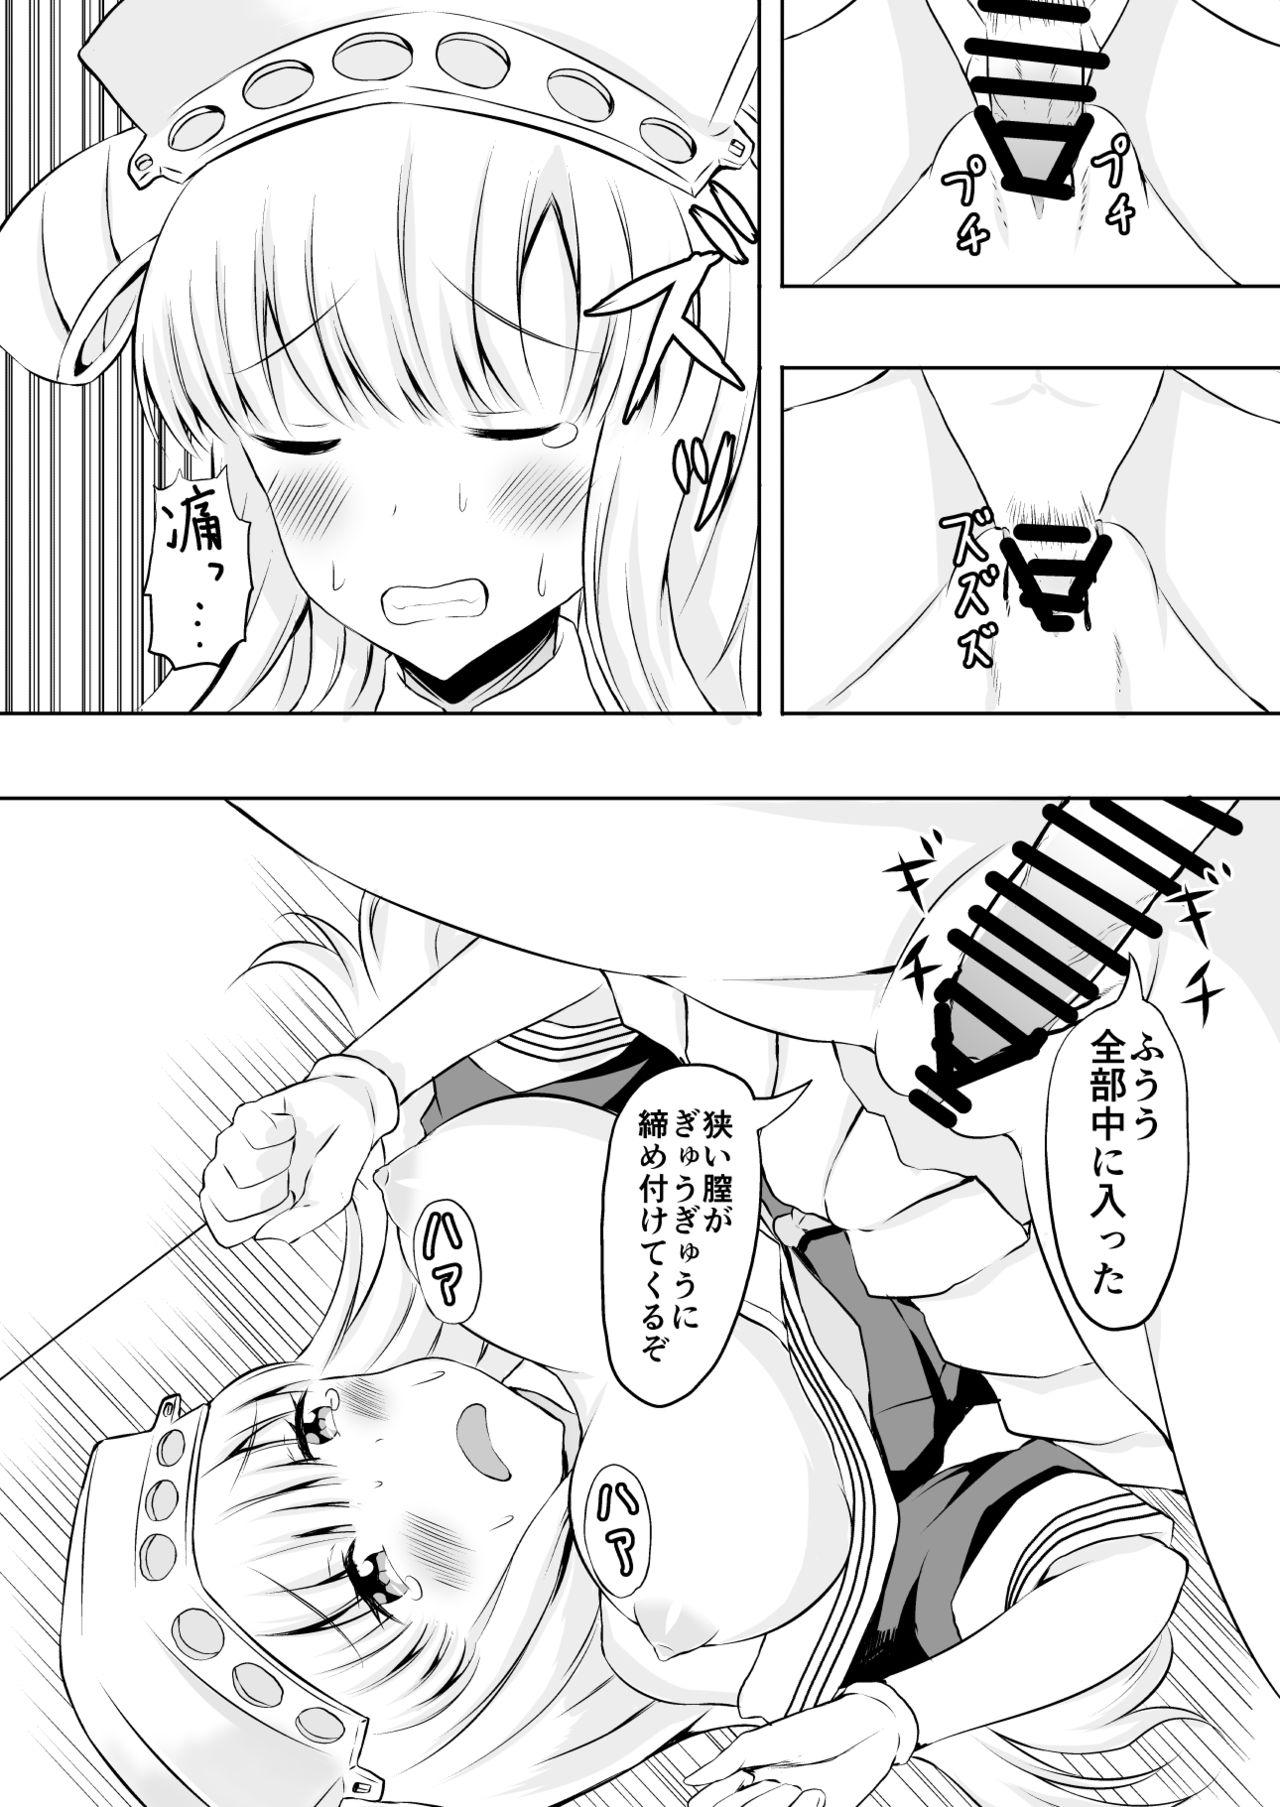 Tit America Bijo to 3P - Kantai collection Hot Whores - Page 11